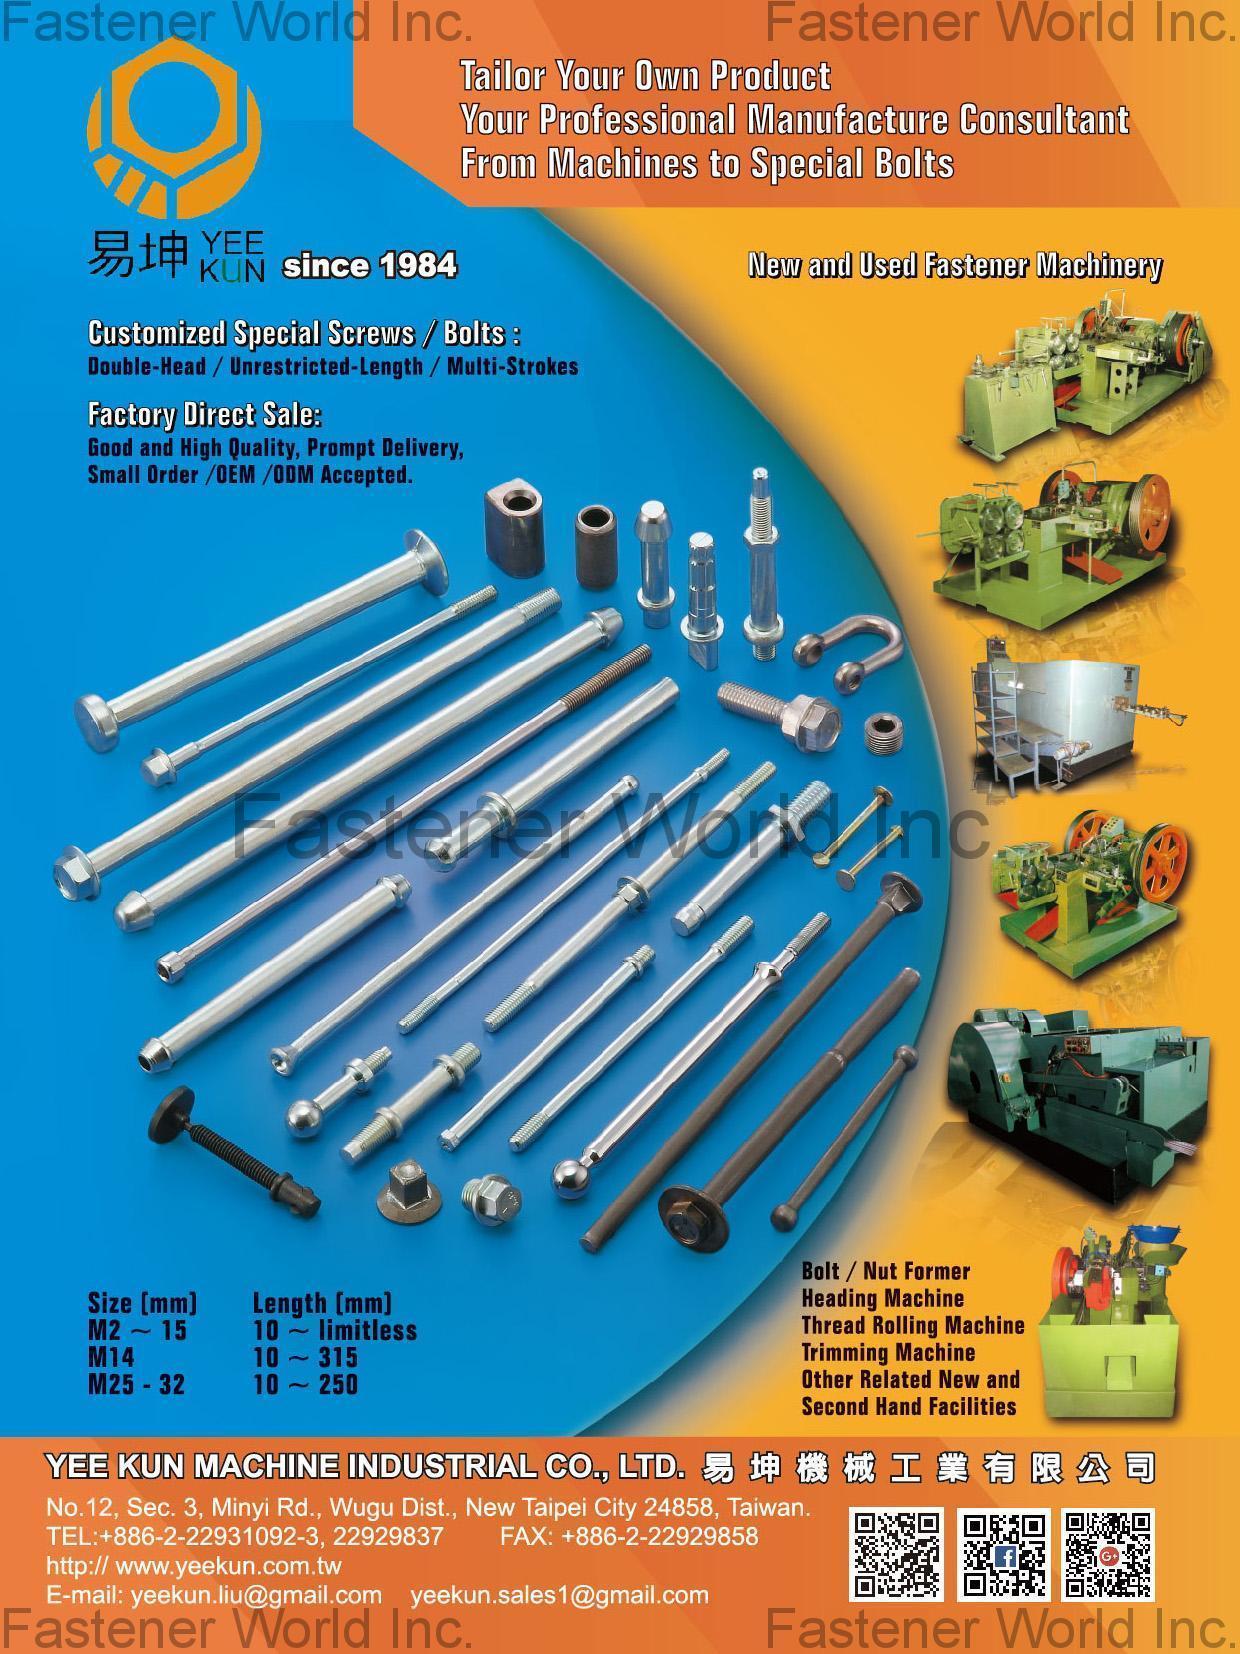 YEE KUN MACHINE INDUSTRIAL CO., LTD. , New and Used Fastener Machinery, Bolt/Nut Former, Heading Machine, Thread Rolling Machine, Trimming Machine, Other Related New and Second Hand Facilities, Customized Special Screws/Bolts , Nut Formers